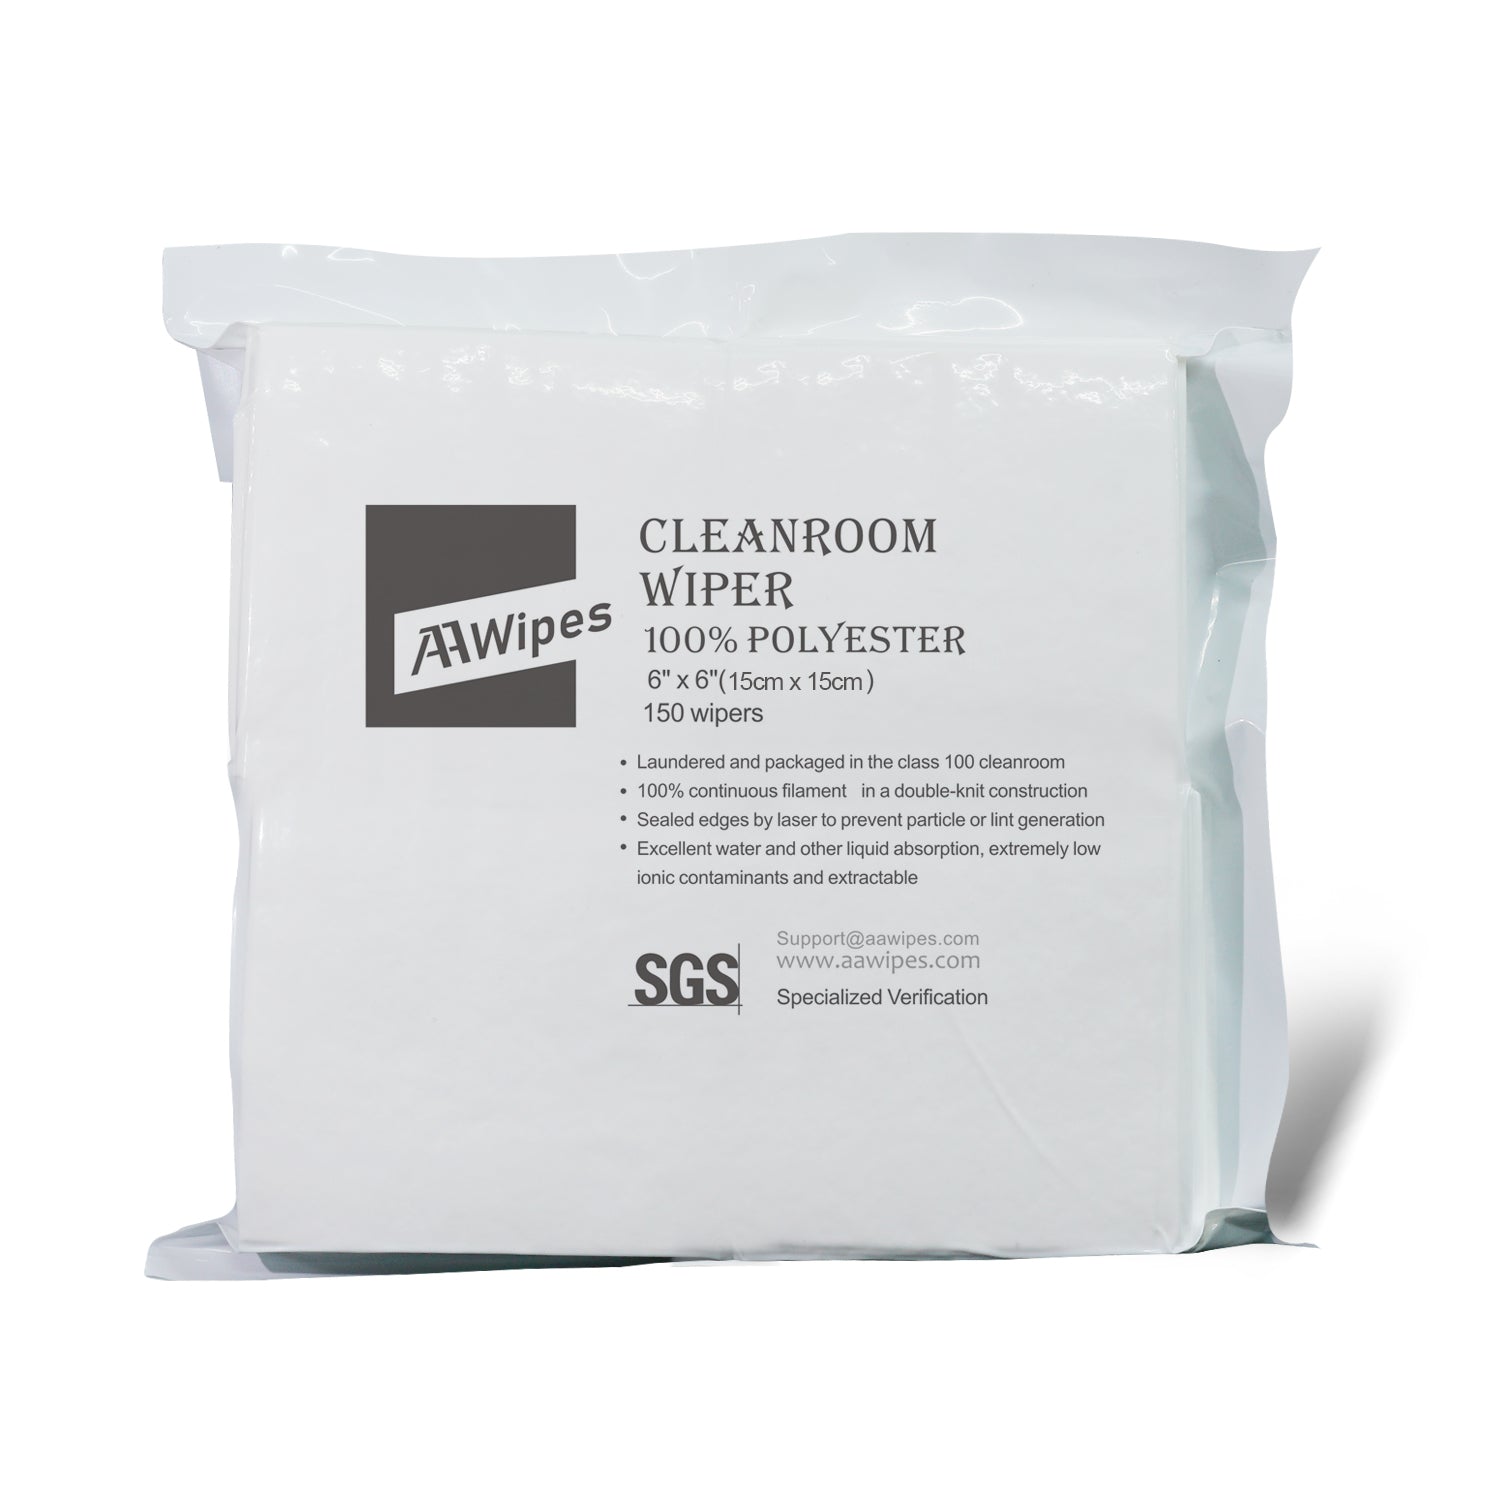 Cleanroom Wipes 6"x6" Double Knit 100% Polyester Wipes Lint Free Cloths with Ultra-fine Filaments, Laser Sealed Edge, Class 100 Cloths, Ultra-Soft Wipes for Critical Pharmaceutical-grade Cleaning. 6,000 wipes/box, 40 bags (No. CP14006).